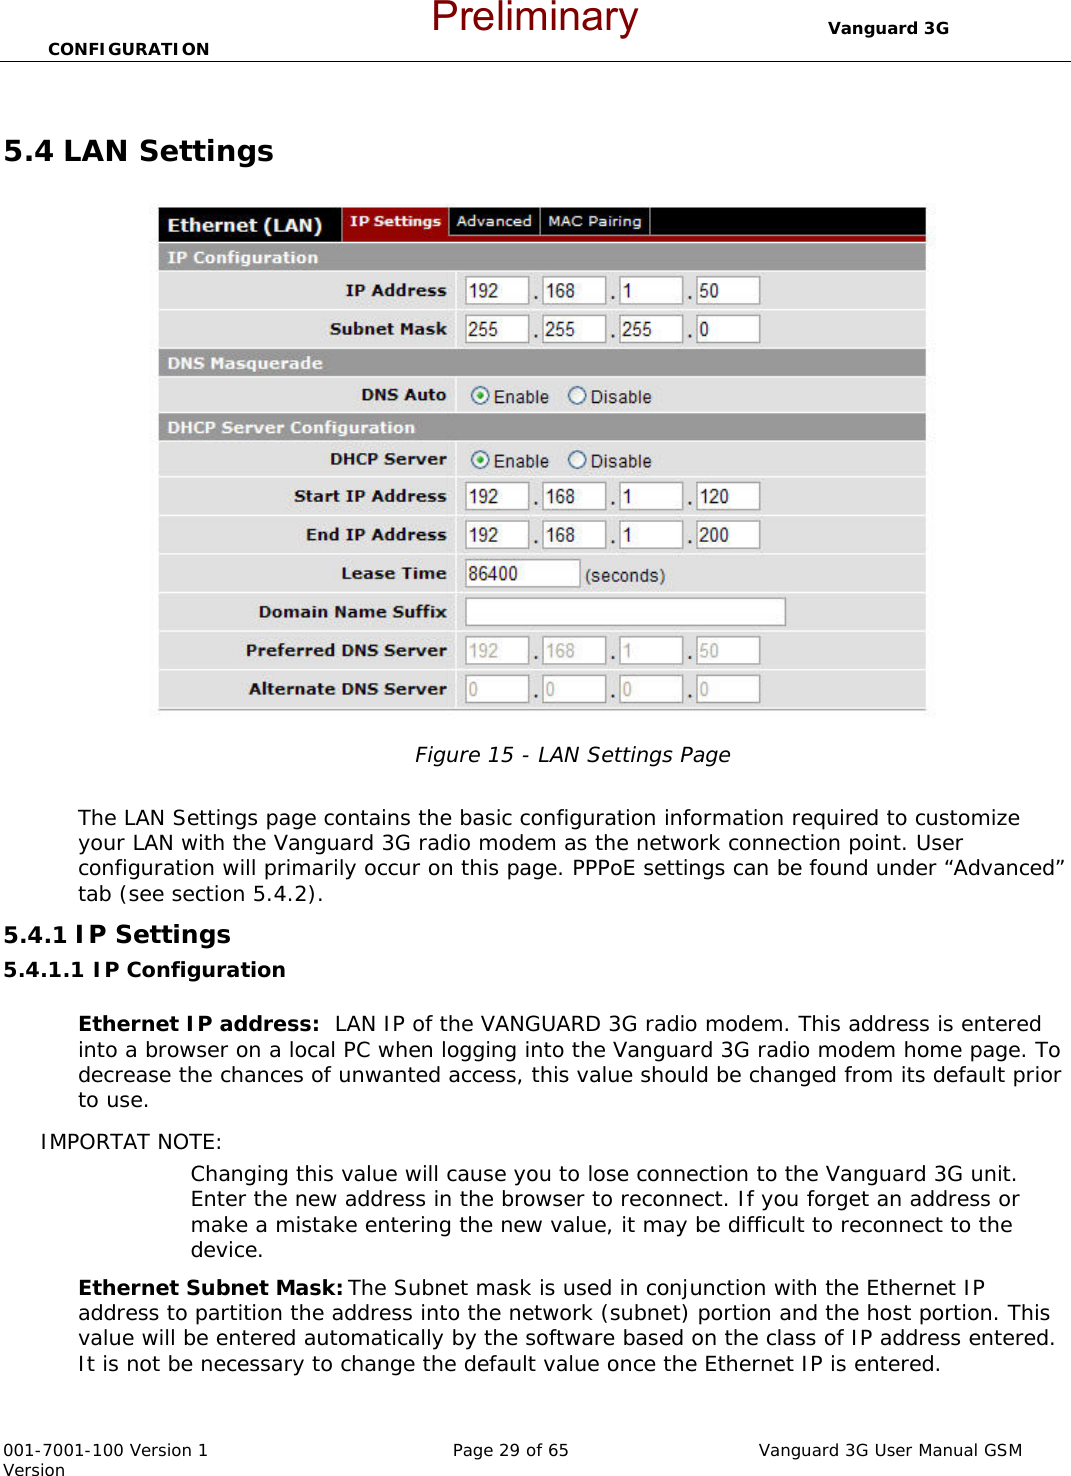                                  Vanguard 3G CONFIGURATION  001-7001-100 Version 1       Page 29 of 65       Vanguard 3G User Manual GSM Version  5.4 LAN Settings  Figure 15 - LAN Settings Page  The LAN Settings page contains the basic configuration information required to customize your LAN with the Vanguard 3G radio modem as the network connection point. User configuration will primarily occur on this page. PPPoE settings can be found under “Advanced” tab (see section 5.4.2). 5.4.1 IP Settings  5.4.1.1 IP Configuration  Ethernet IP address:  LAN IP of the VANGUARD 3G radio modem. This address is entered into a browser on a local PC when logging into the Vanguard 3G radio modem home page. To decrease the chances of unwanted access, this value should be changed from its default prior to use.   IMPORTAT NOTE:   Changing this value will cause you to lose connection to the Vanguard 3G unit. Enter the new address in the browser to reconnect. If you forget an address or make a mistake entering the new value, it may be difficult to reconnect to the device.   Ethernet Subnet Mask: The Subnet mask is used in conjunction with the Ethernet IP address to partition the address into the network (subnet) portion and the host portion. This value will be entered automatically by the software based on the class of IP address entered.  It is not be necessary to change the default value once the Ethernet IP is entered.   Preliminary